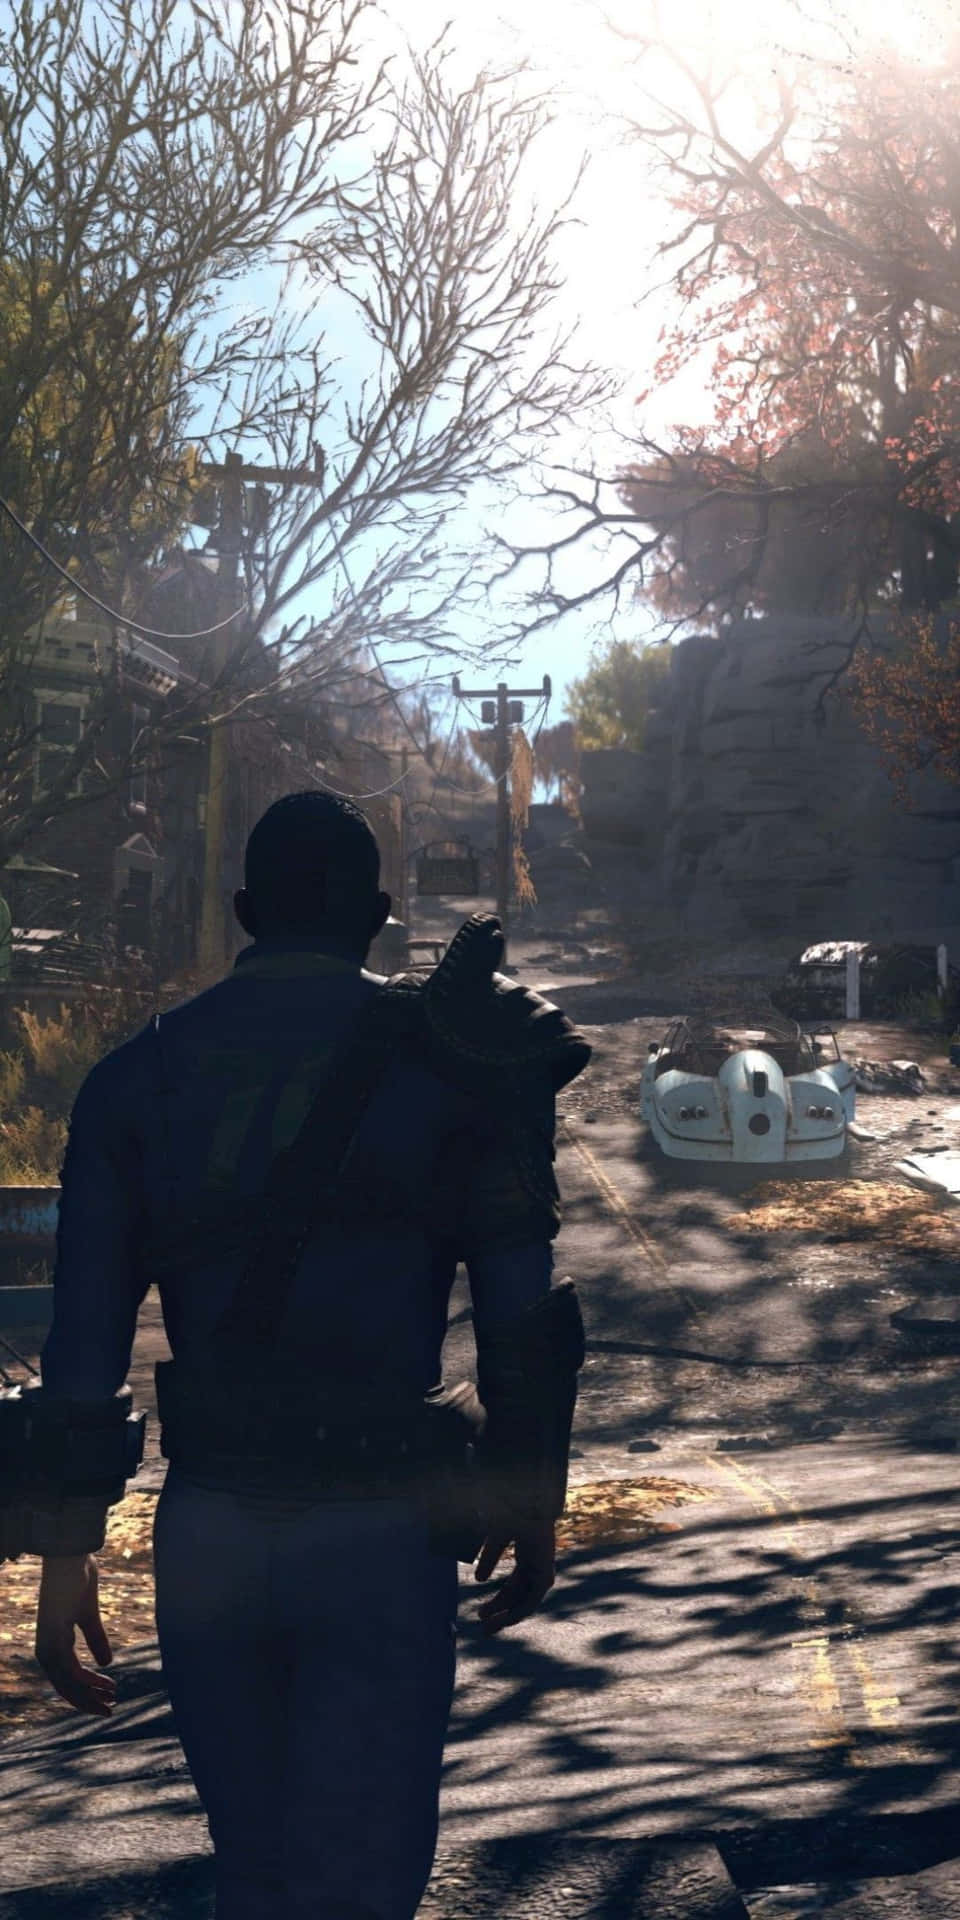 Pixel 3 and Fallout 76 – epic gaming combination